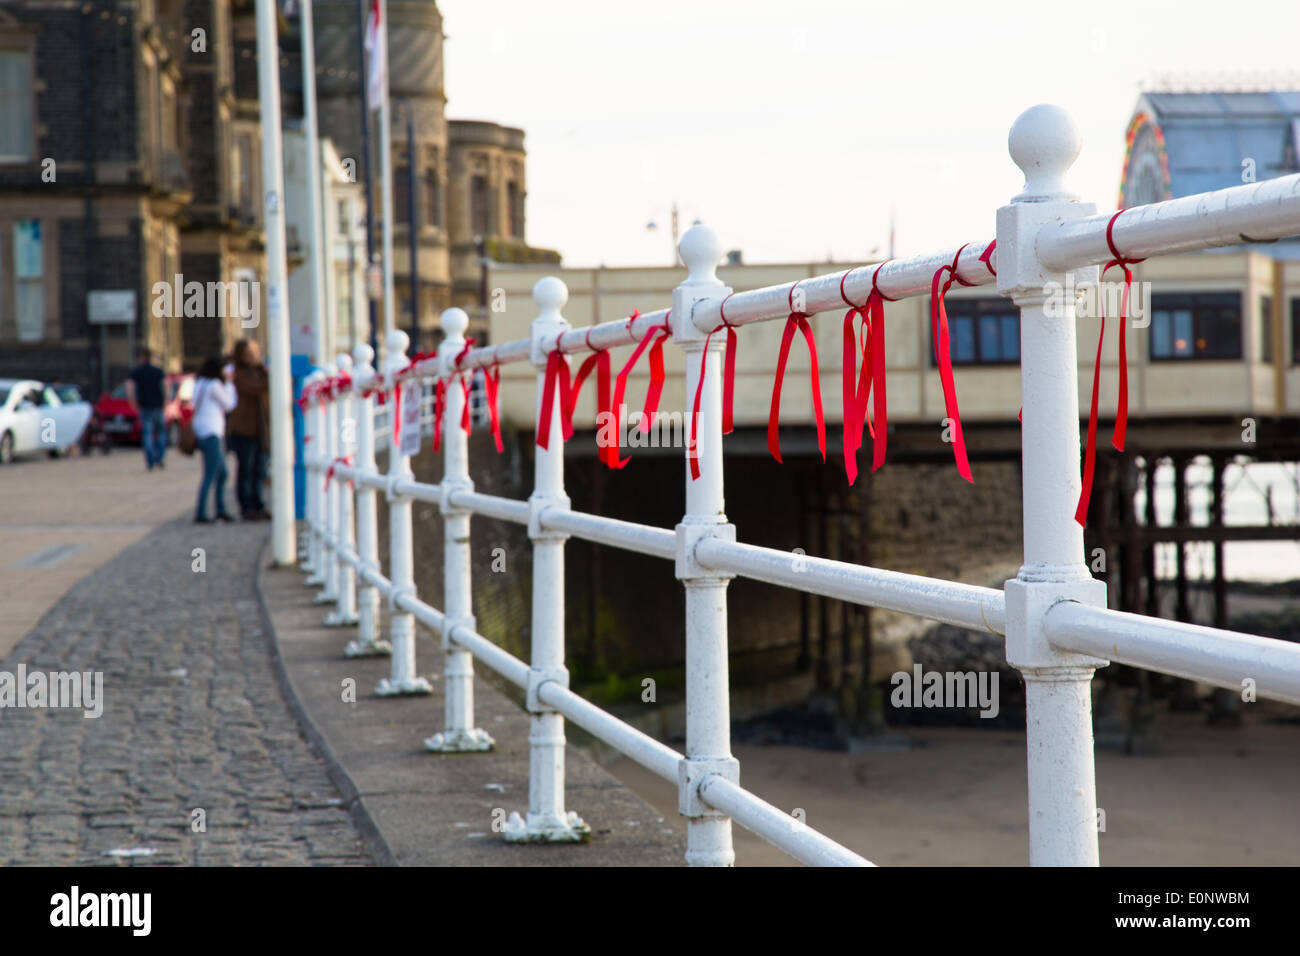 Aberystwyth, Wales, UK. 17th May, 2014.   The railings along the promenade at Aberystwyth, mid Wales, have been adorned with red ribbons to draw attention to the campaign to 'Bring back our girls'. These are the 230 School girls who were kidnapped from the Chibok Government Secondary School by Boko Haram terrorists in Nigeria. Credit:  atgof.co/Alamy Live News Stock Photo